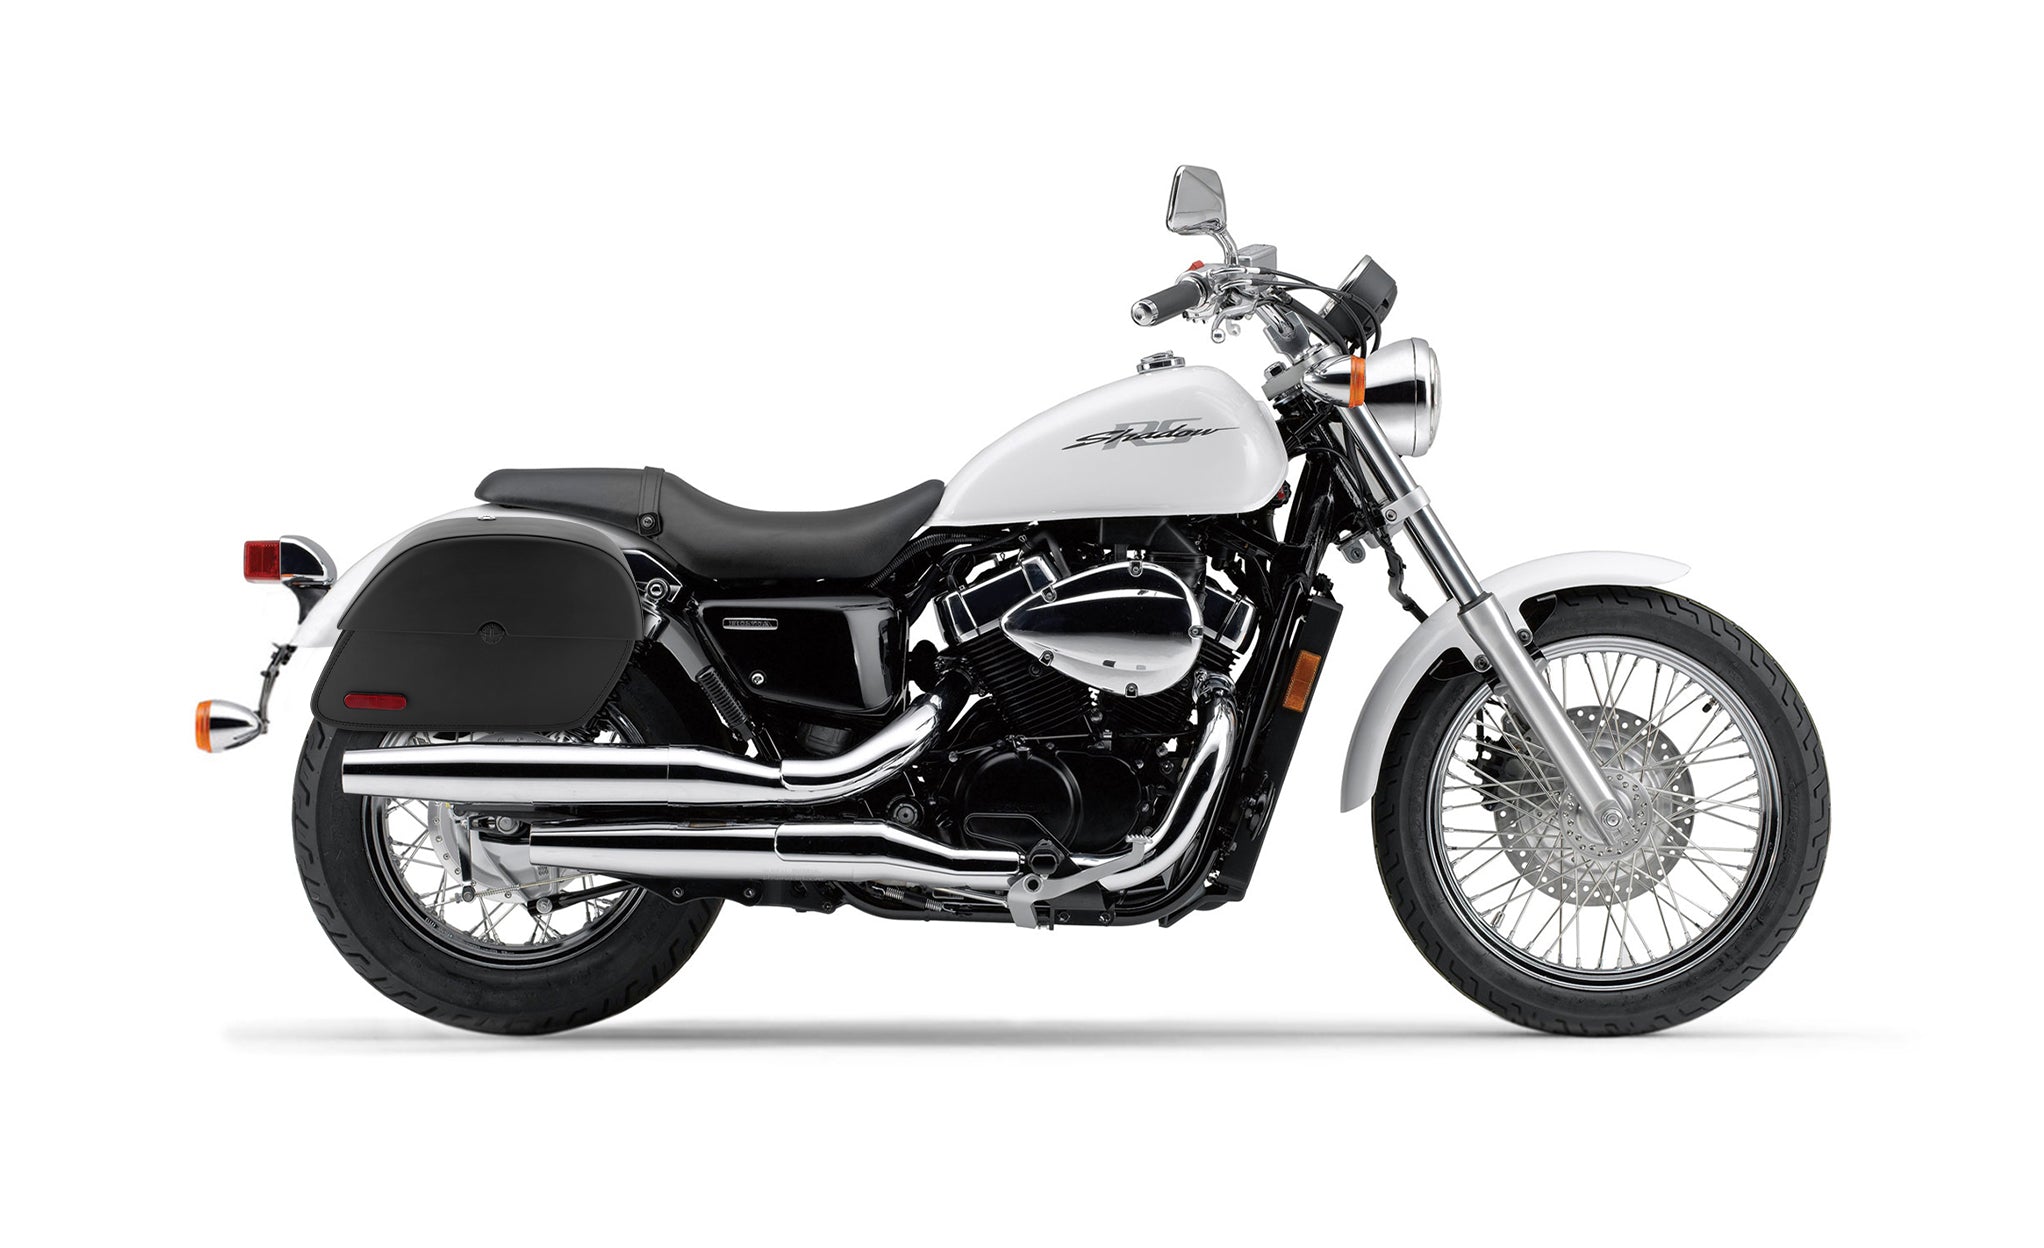 Viking Panzer Medium Honda Shadow 750 Rs Leather Motorcycle Saddlebags Engineering Excellence with Bag on Bike @expand